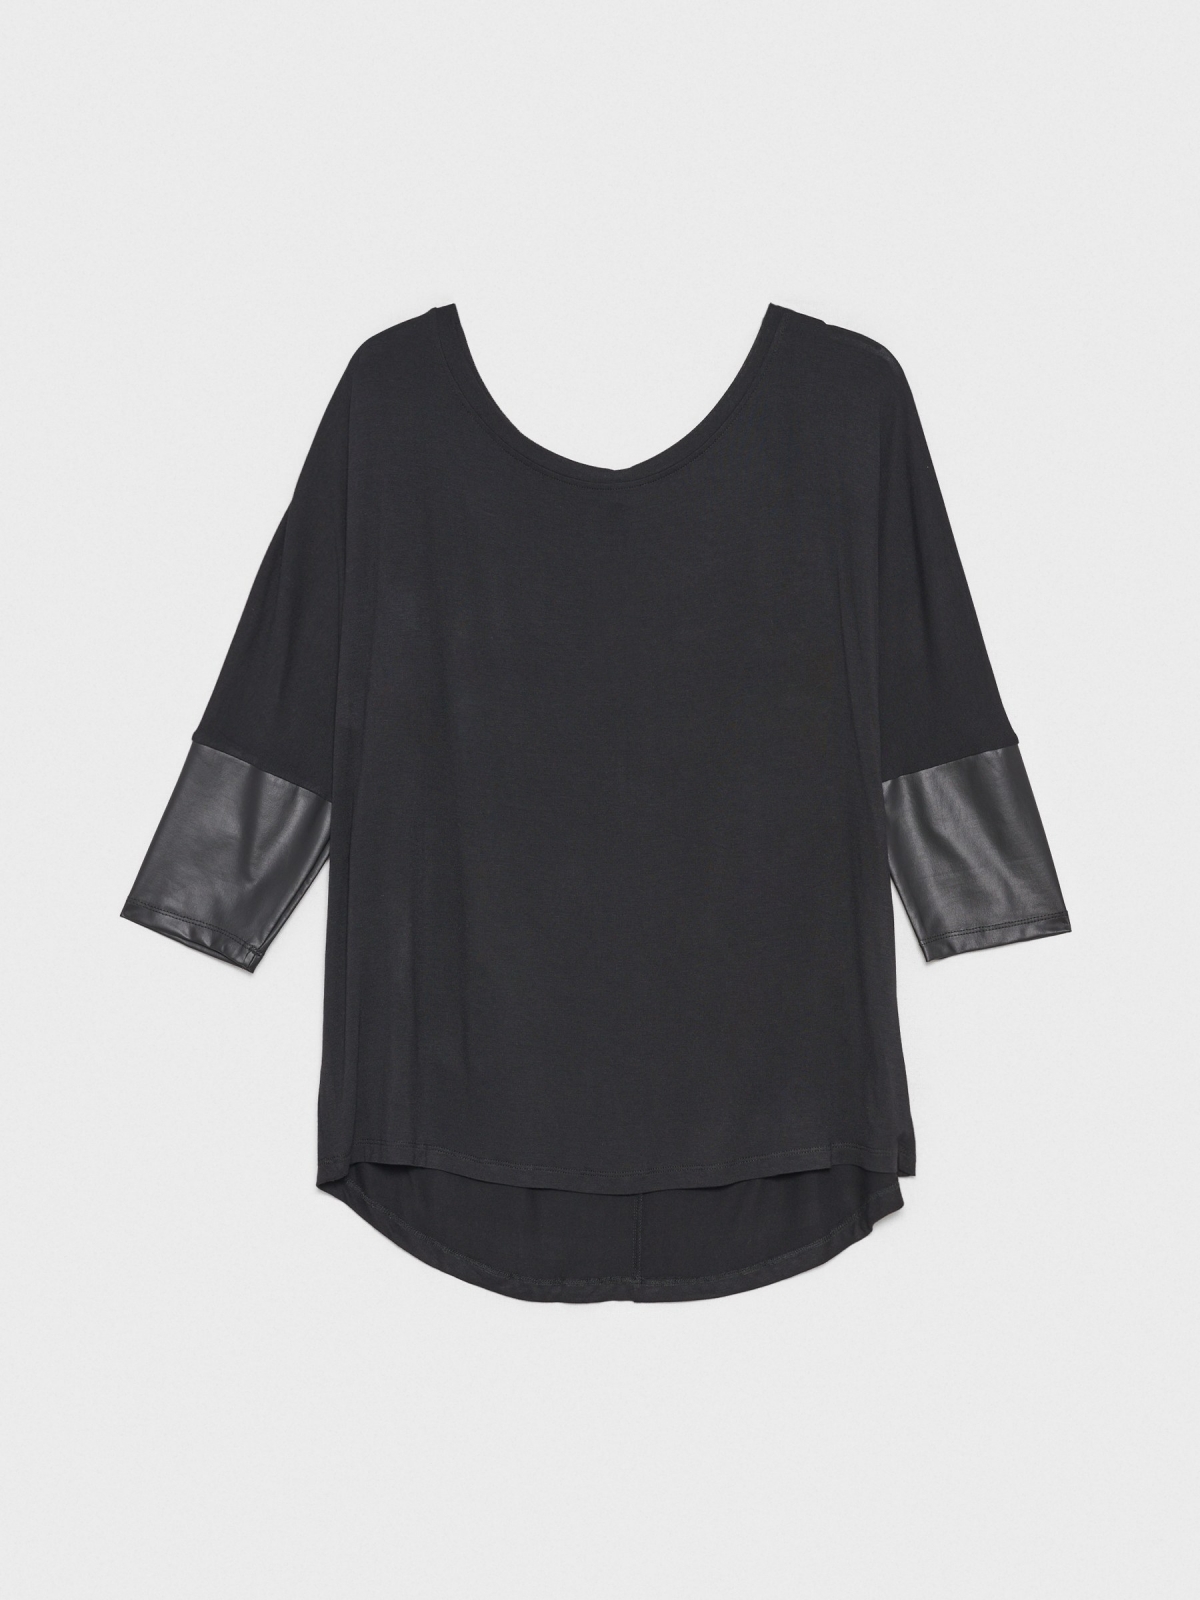  T-shirt with leather effect details black